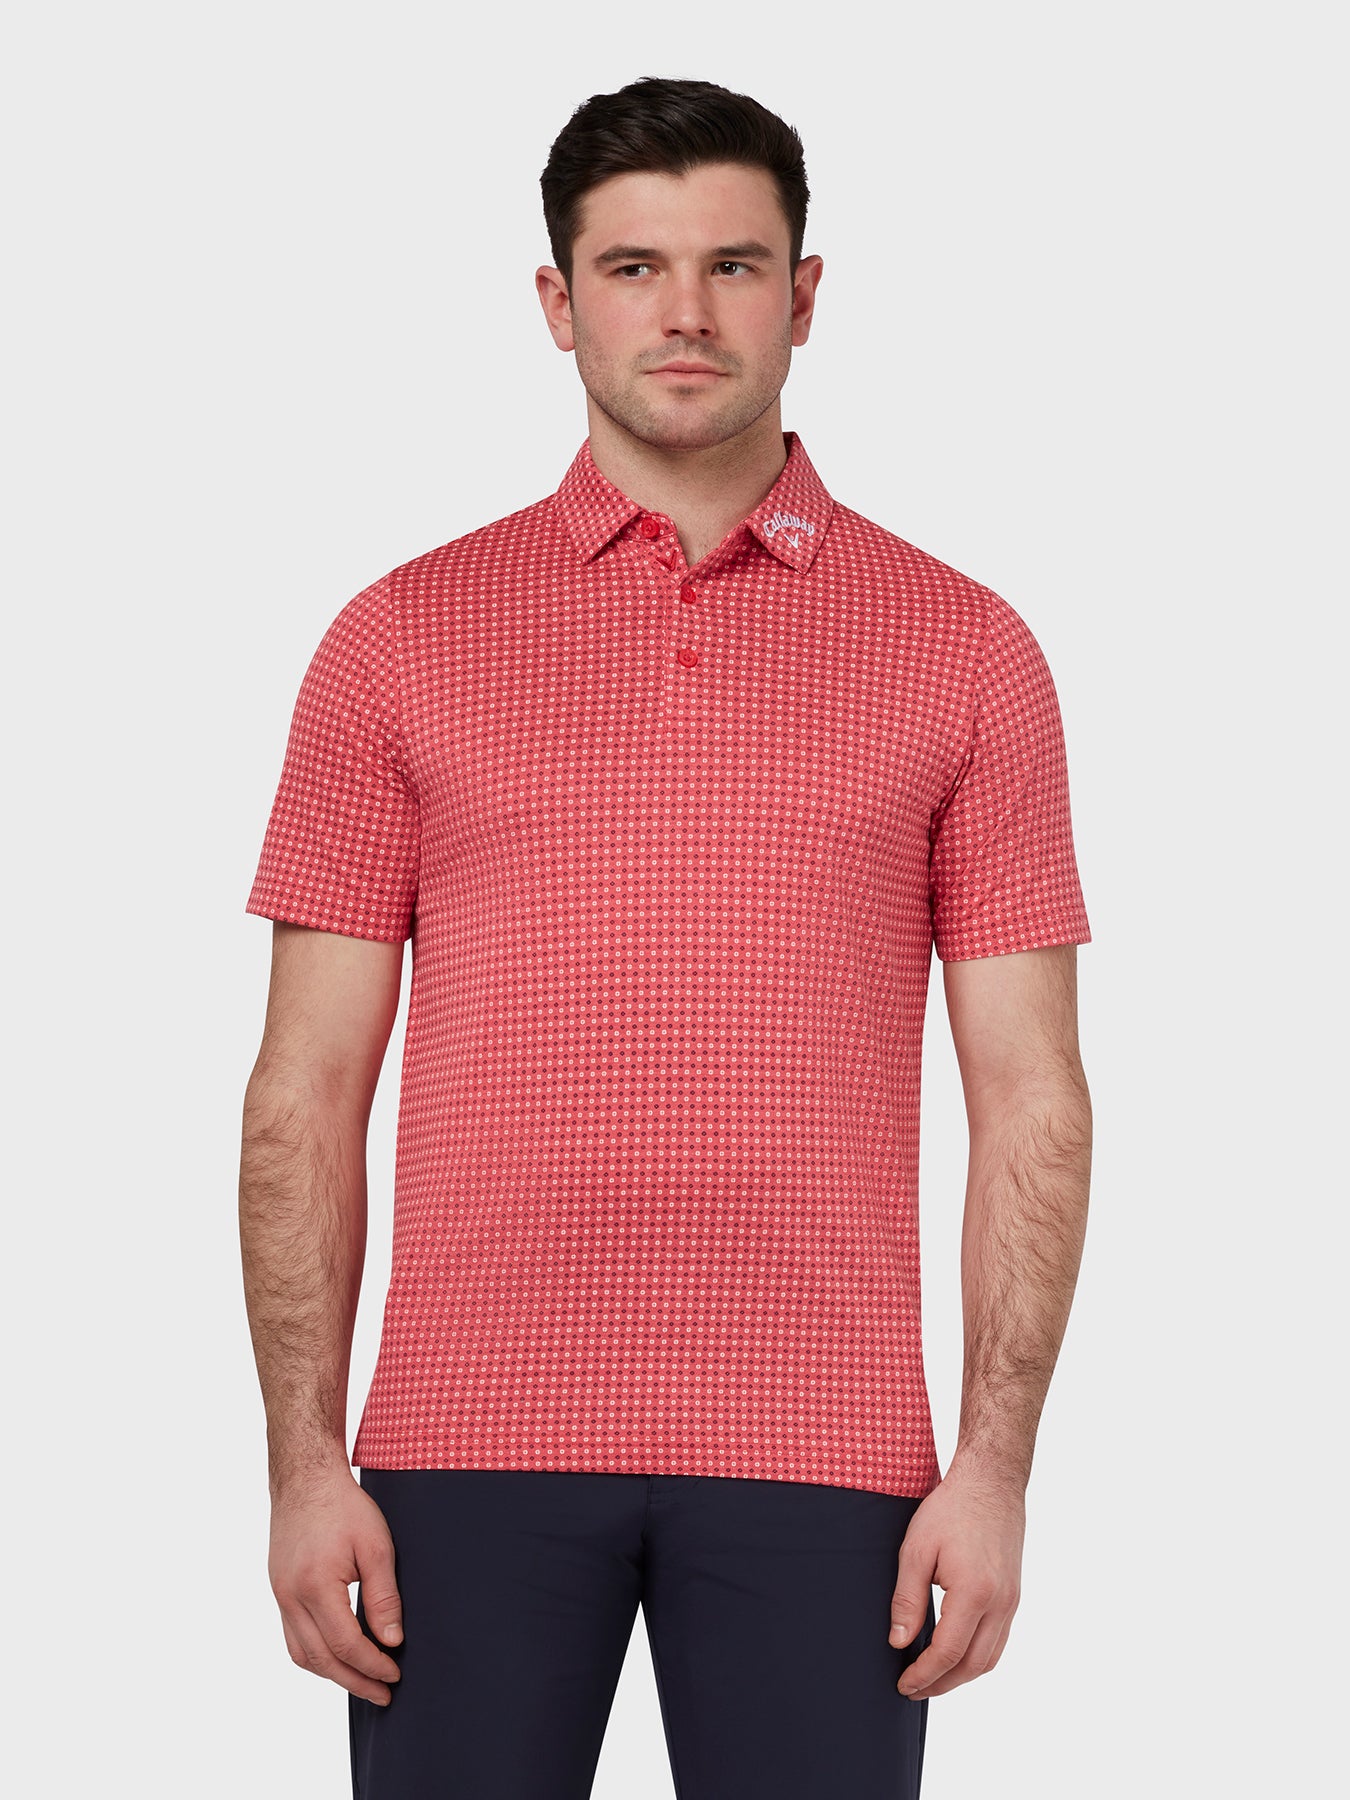 View Soft Touch Micro Print Polo In Teaberry Heather Teaberry Heather M information